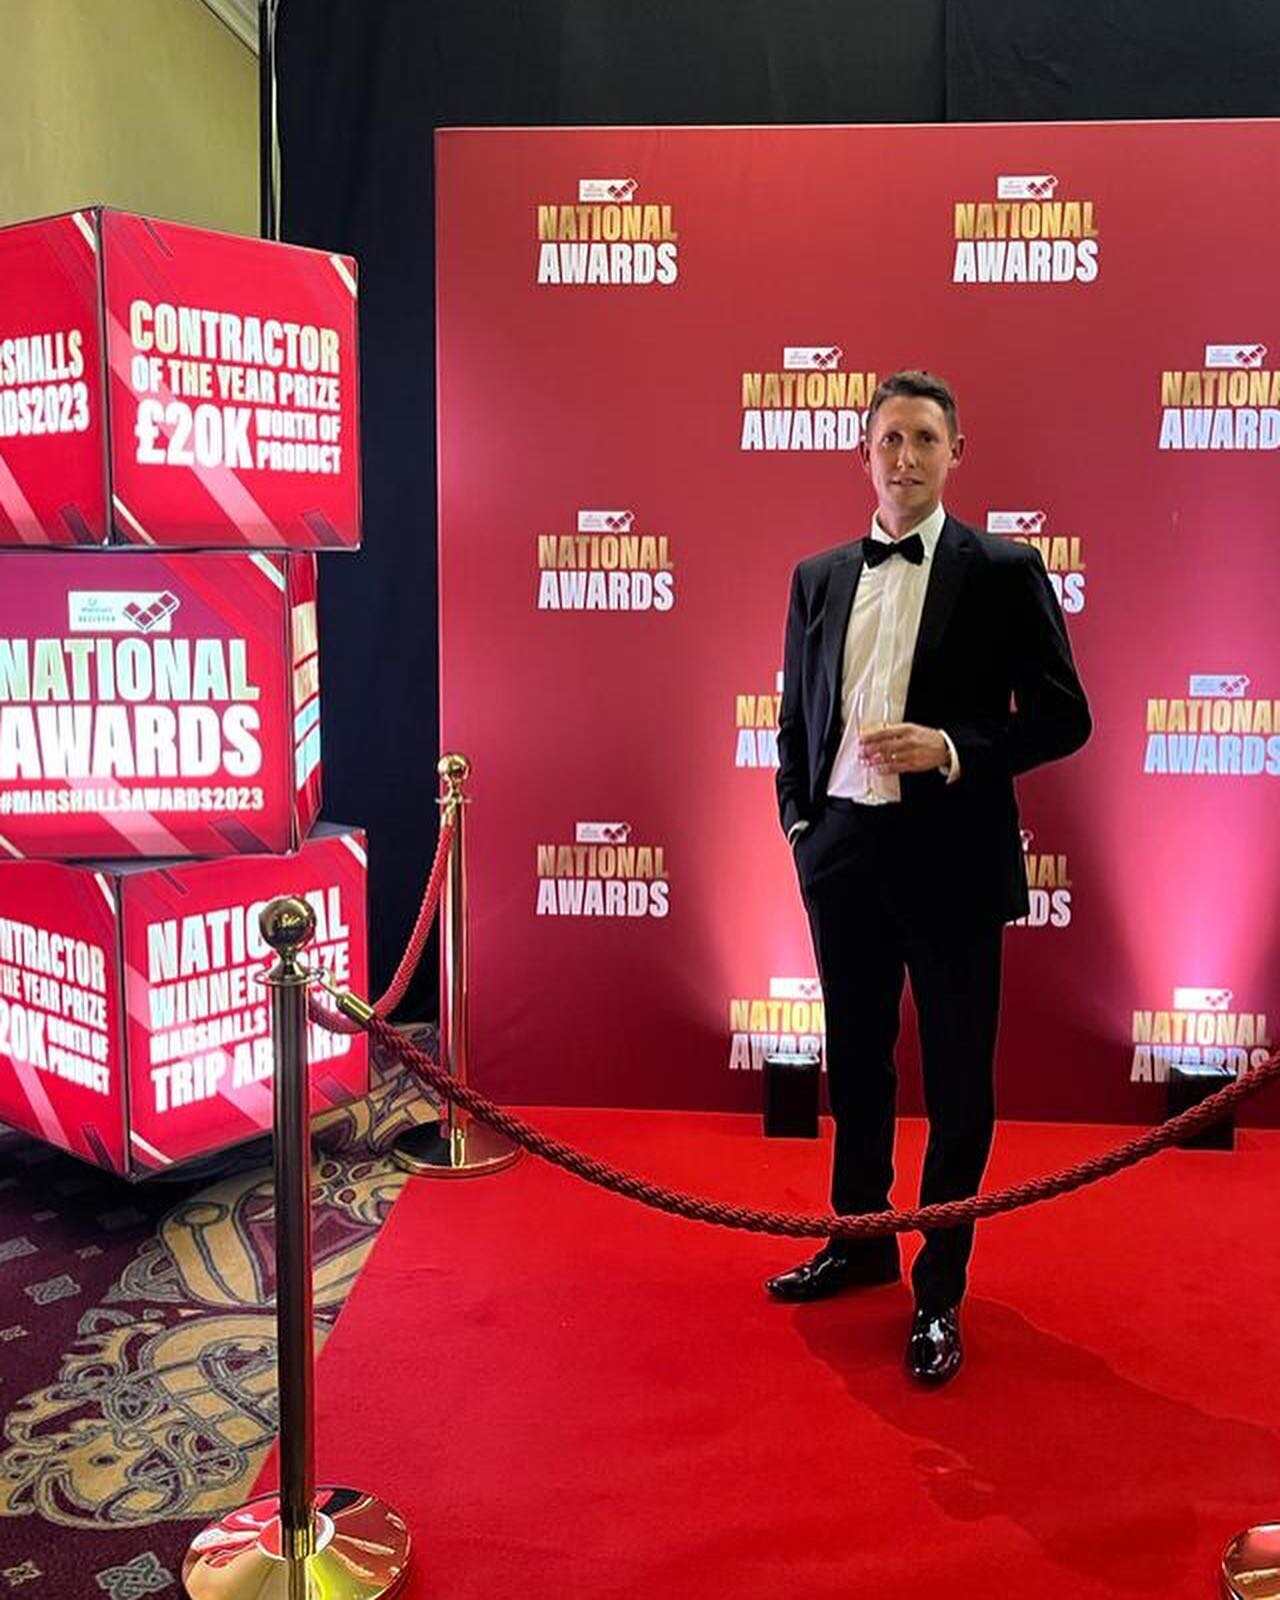 Last week we were in Celtic Manor for the Marshall&rsquo;s awards where we were luckily enough to be awarded a Marshall&rsquo;s National Award for Highly commended driveway. I&rsquo;m grateful to all the team and for their hard work to get us this st